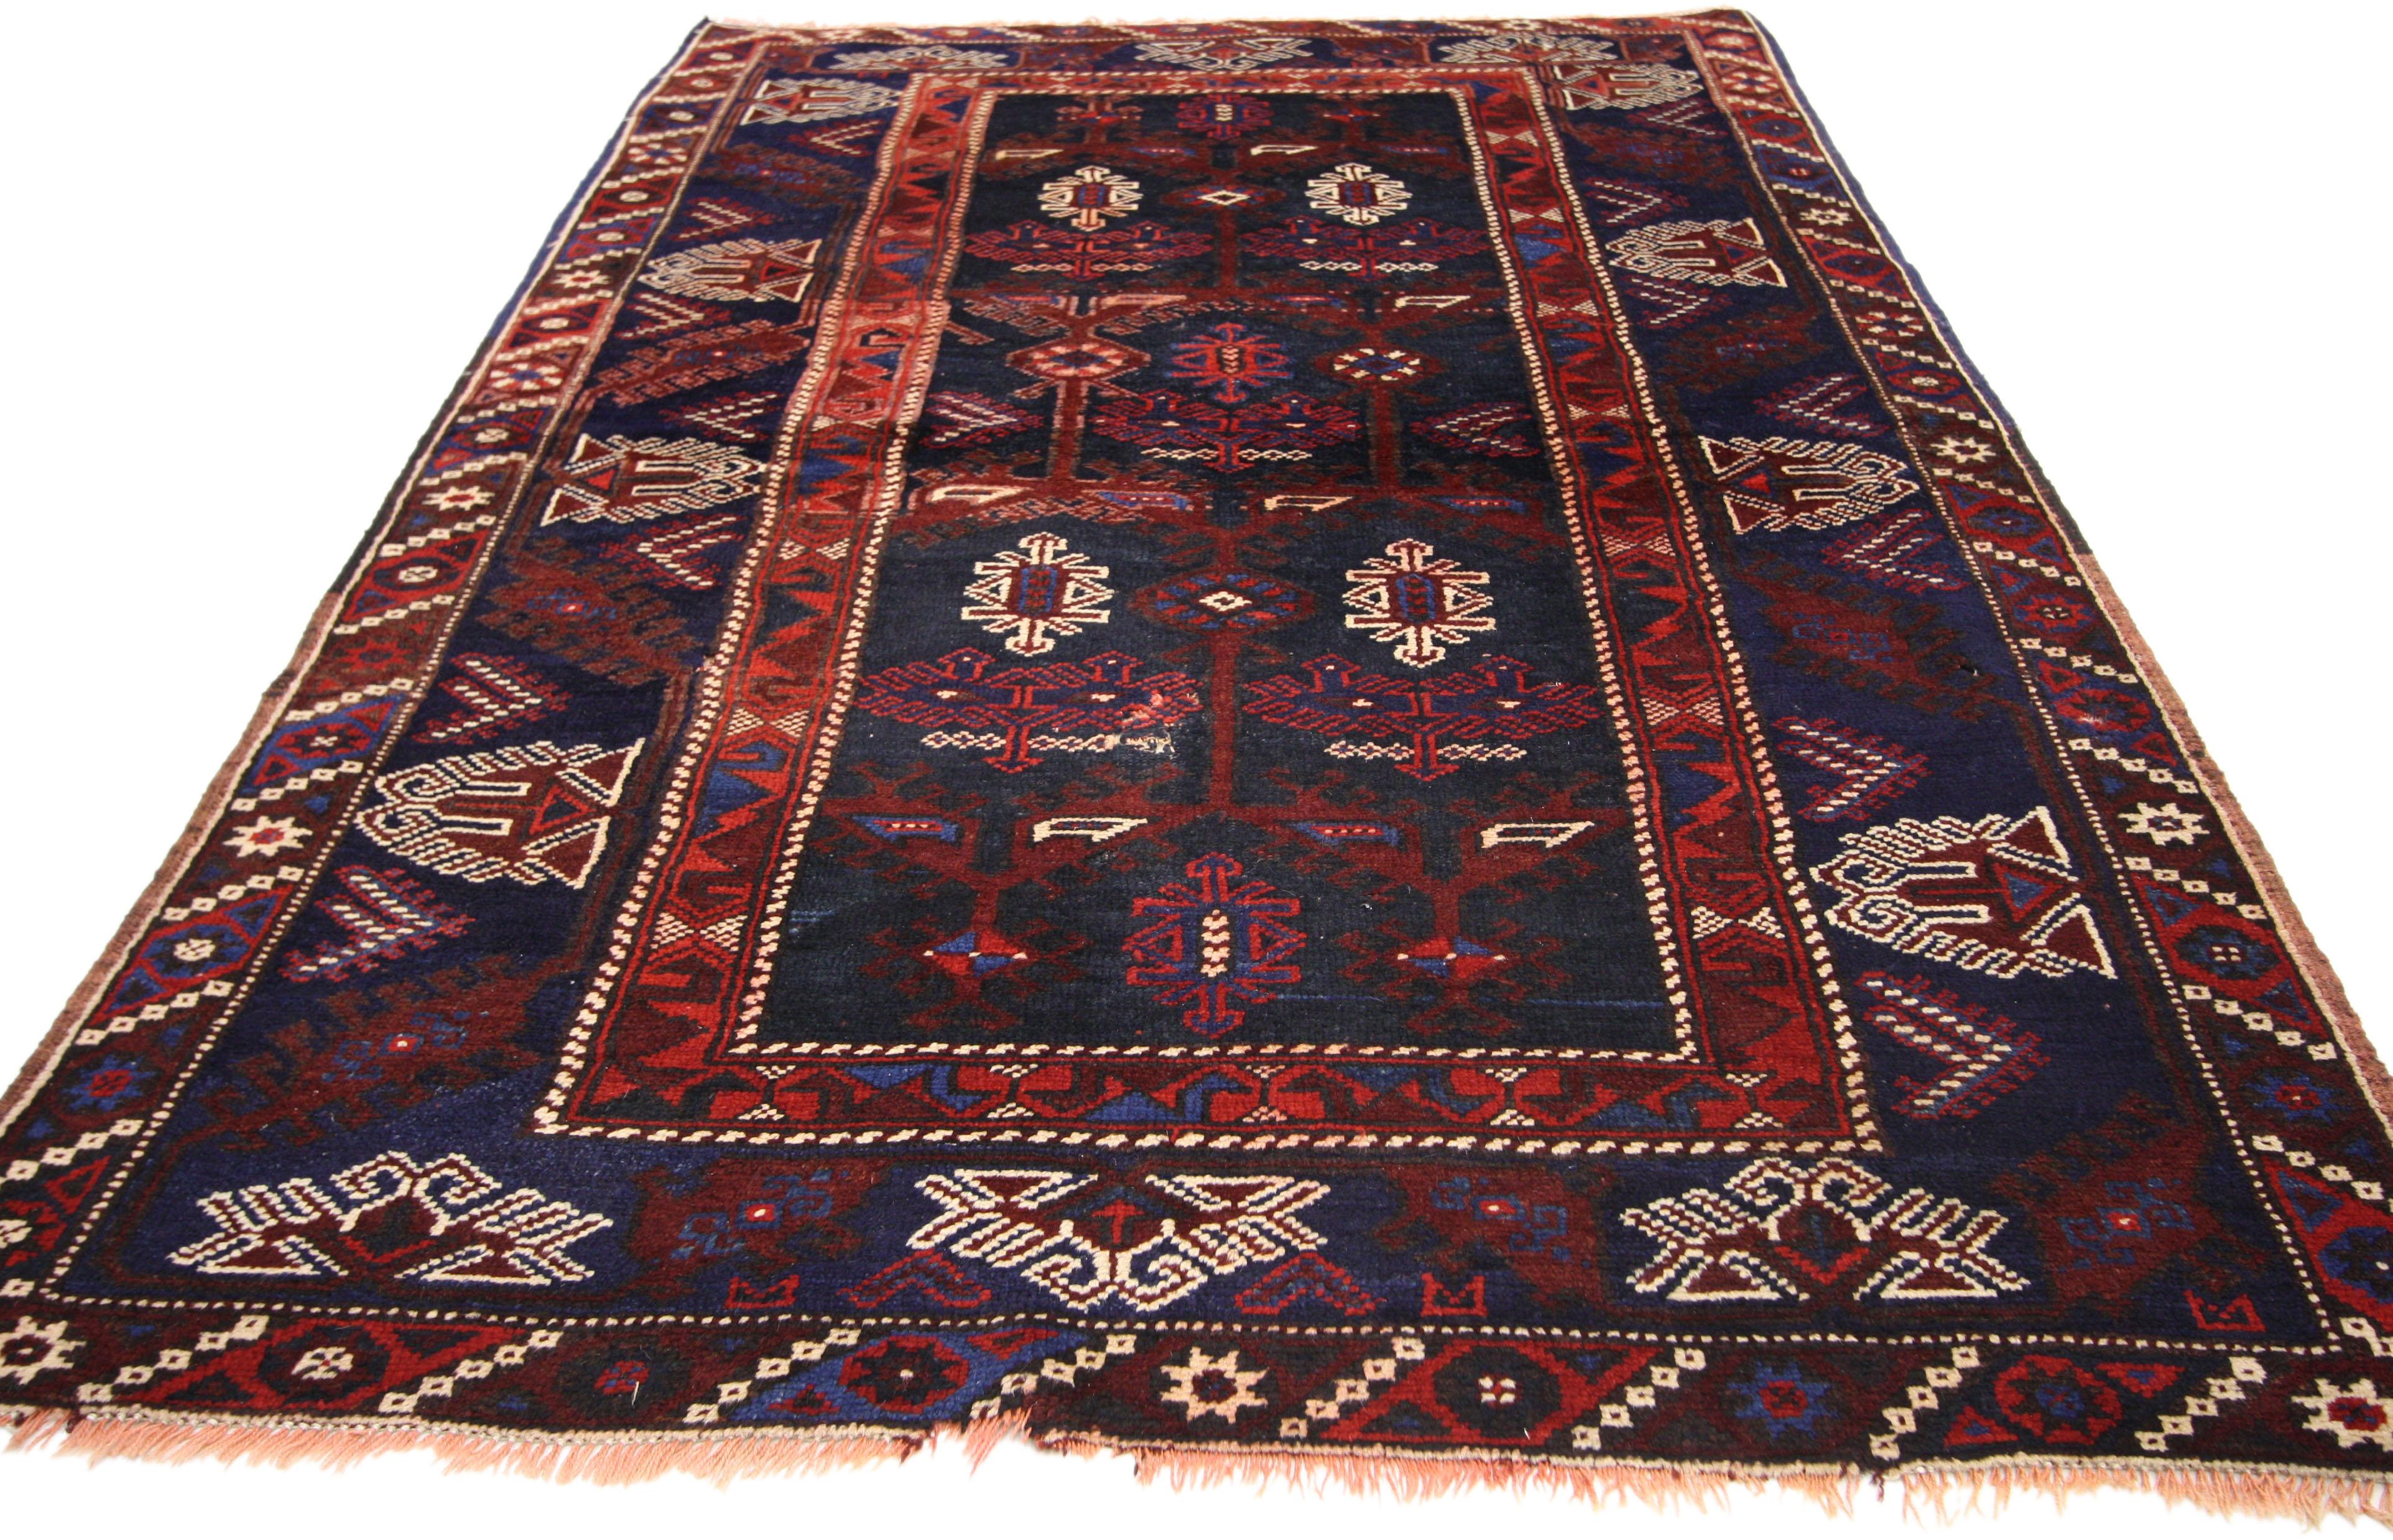 Antique Afghani Tribal Rug or Kitchen, Bath, Foyer or Entryway In Good Condition For Sale In Dallas, TX